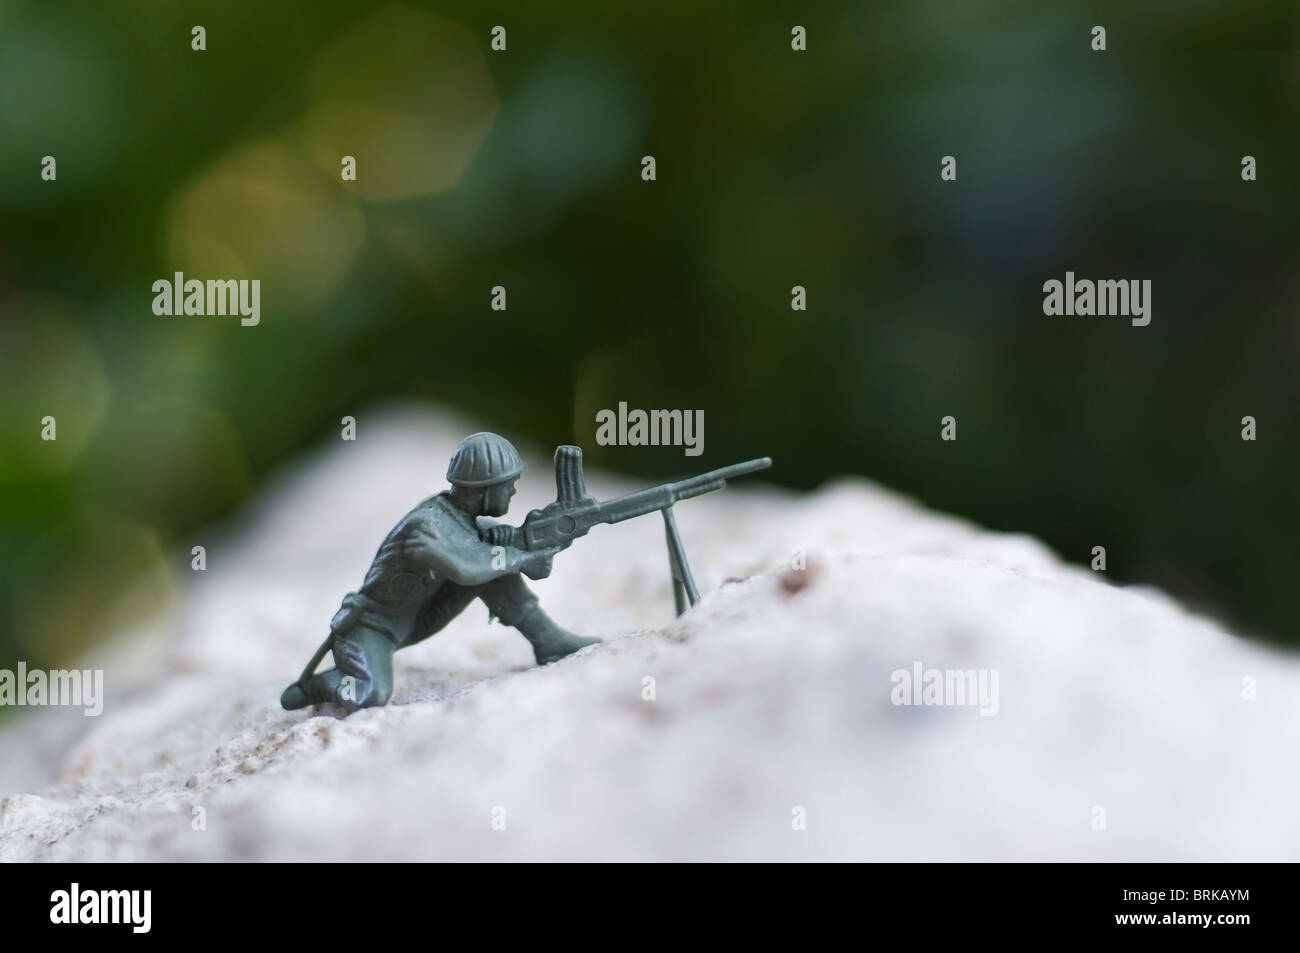 A green plastic toy soldier takes aim with his weapon in the rugged outdoors. Stock Photo